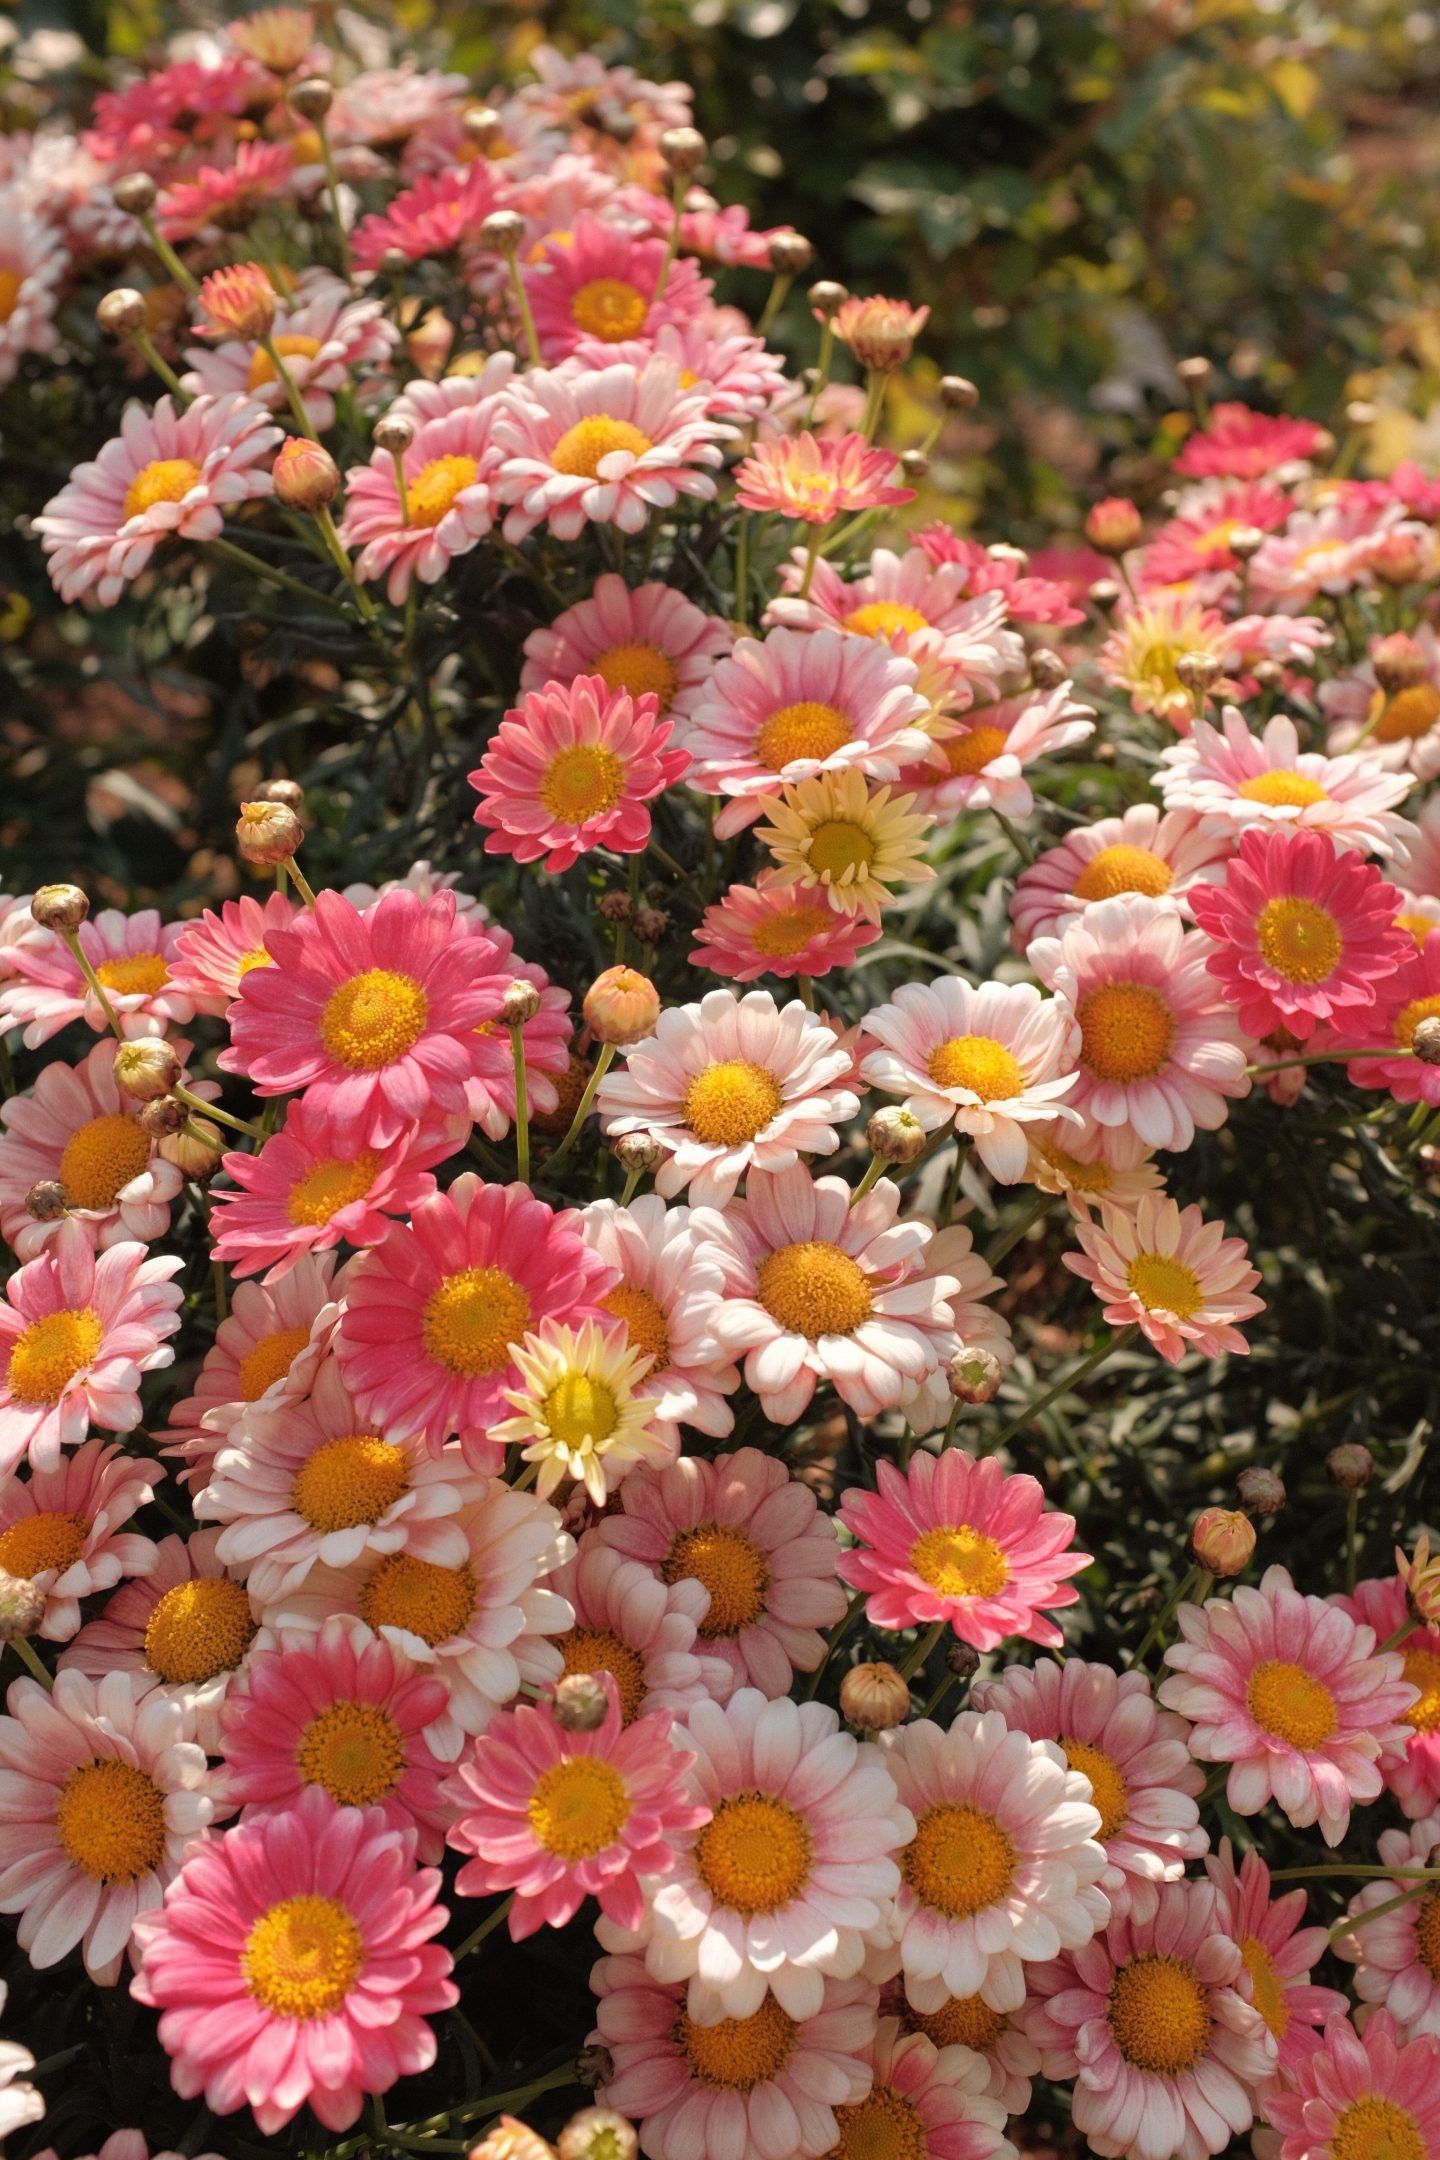 A close up of some pink and white flowers - Flower, garden